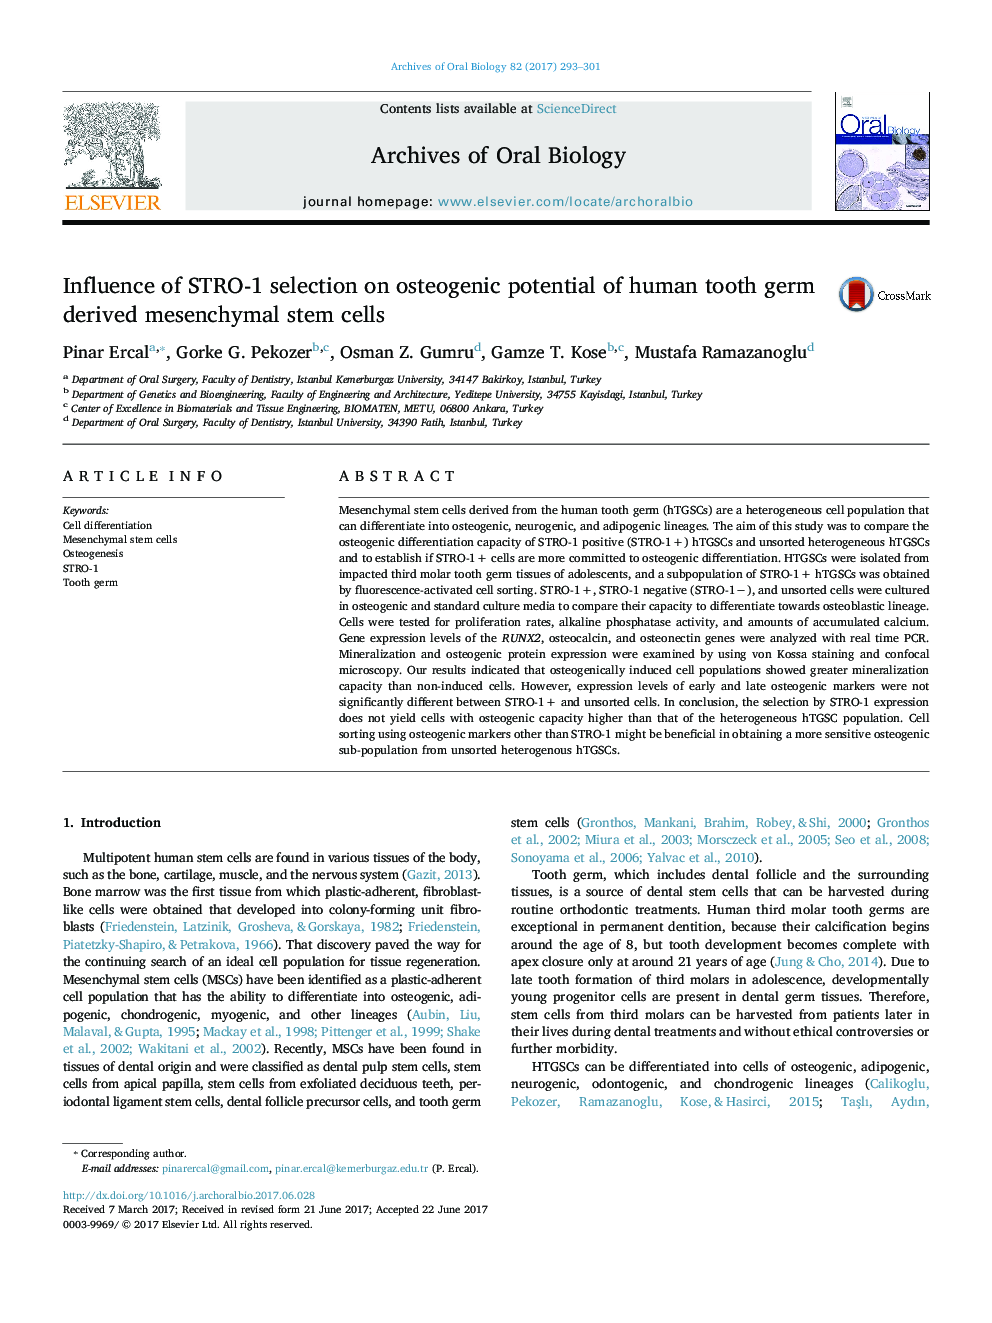 Influence of STRO-1 selection on osteogenic potential of human tooth germ derived mesenchymal stem cells